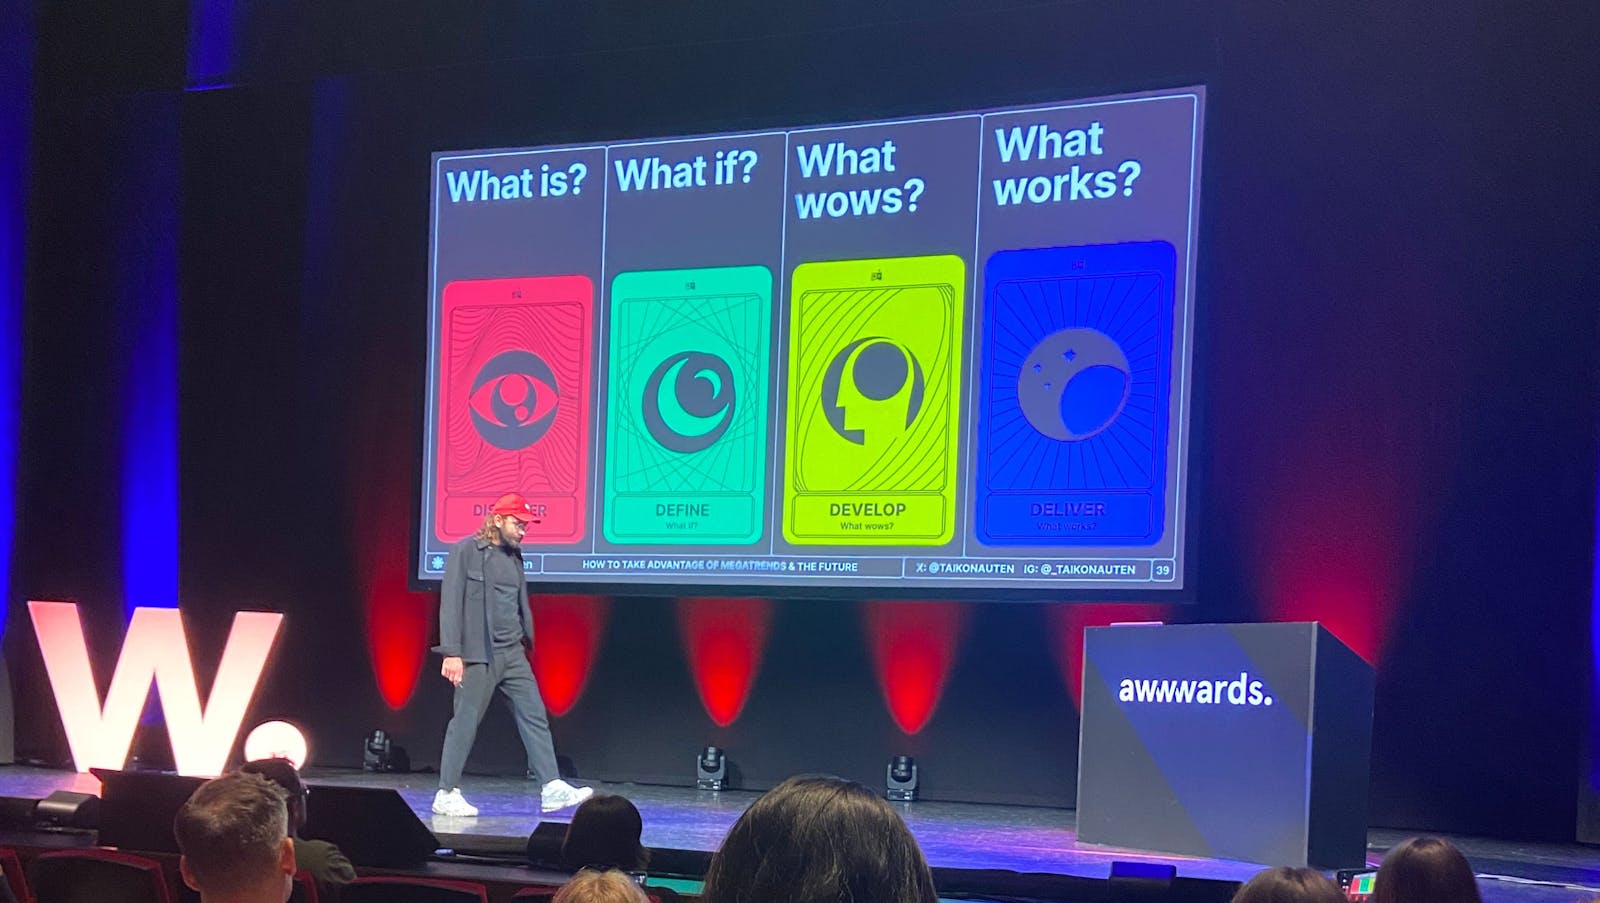 The image shows a speaker on stage at the Awwwards event. In front of him is a large screen with three colorful panels, posing the questions "What is?", "What if?" and "What wows?", each accompanied by a corresponding word: DISCOVER, DEFINE, and DEVELOP, 